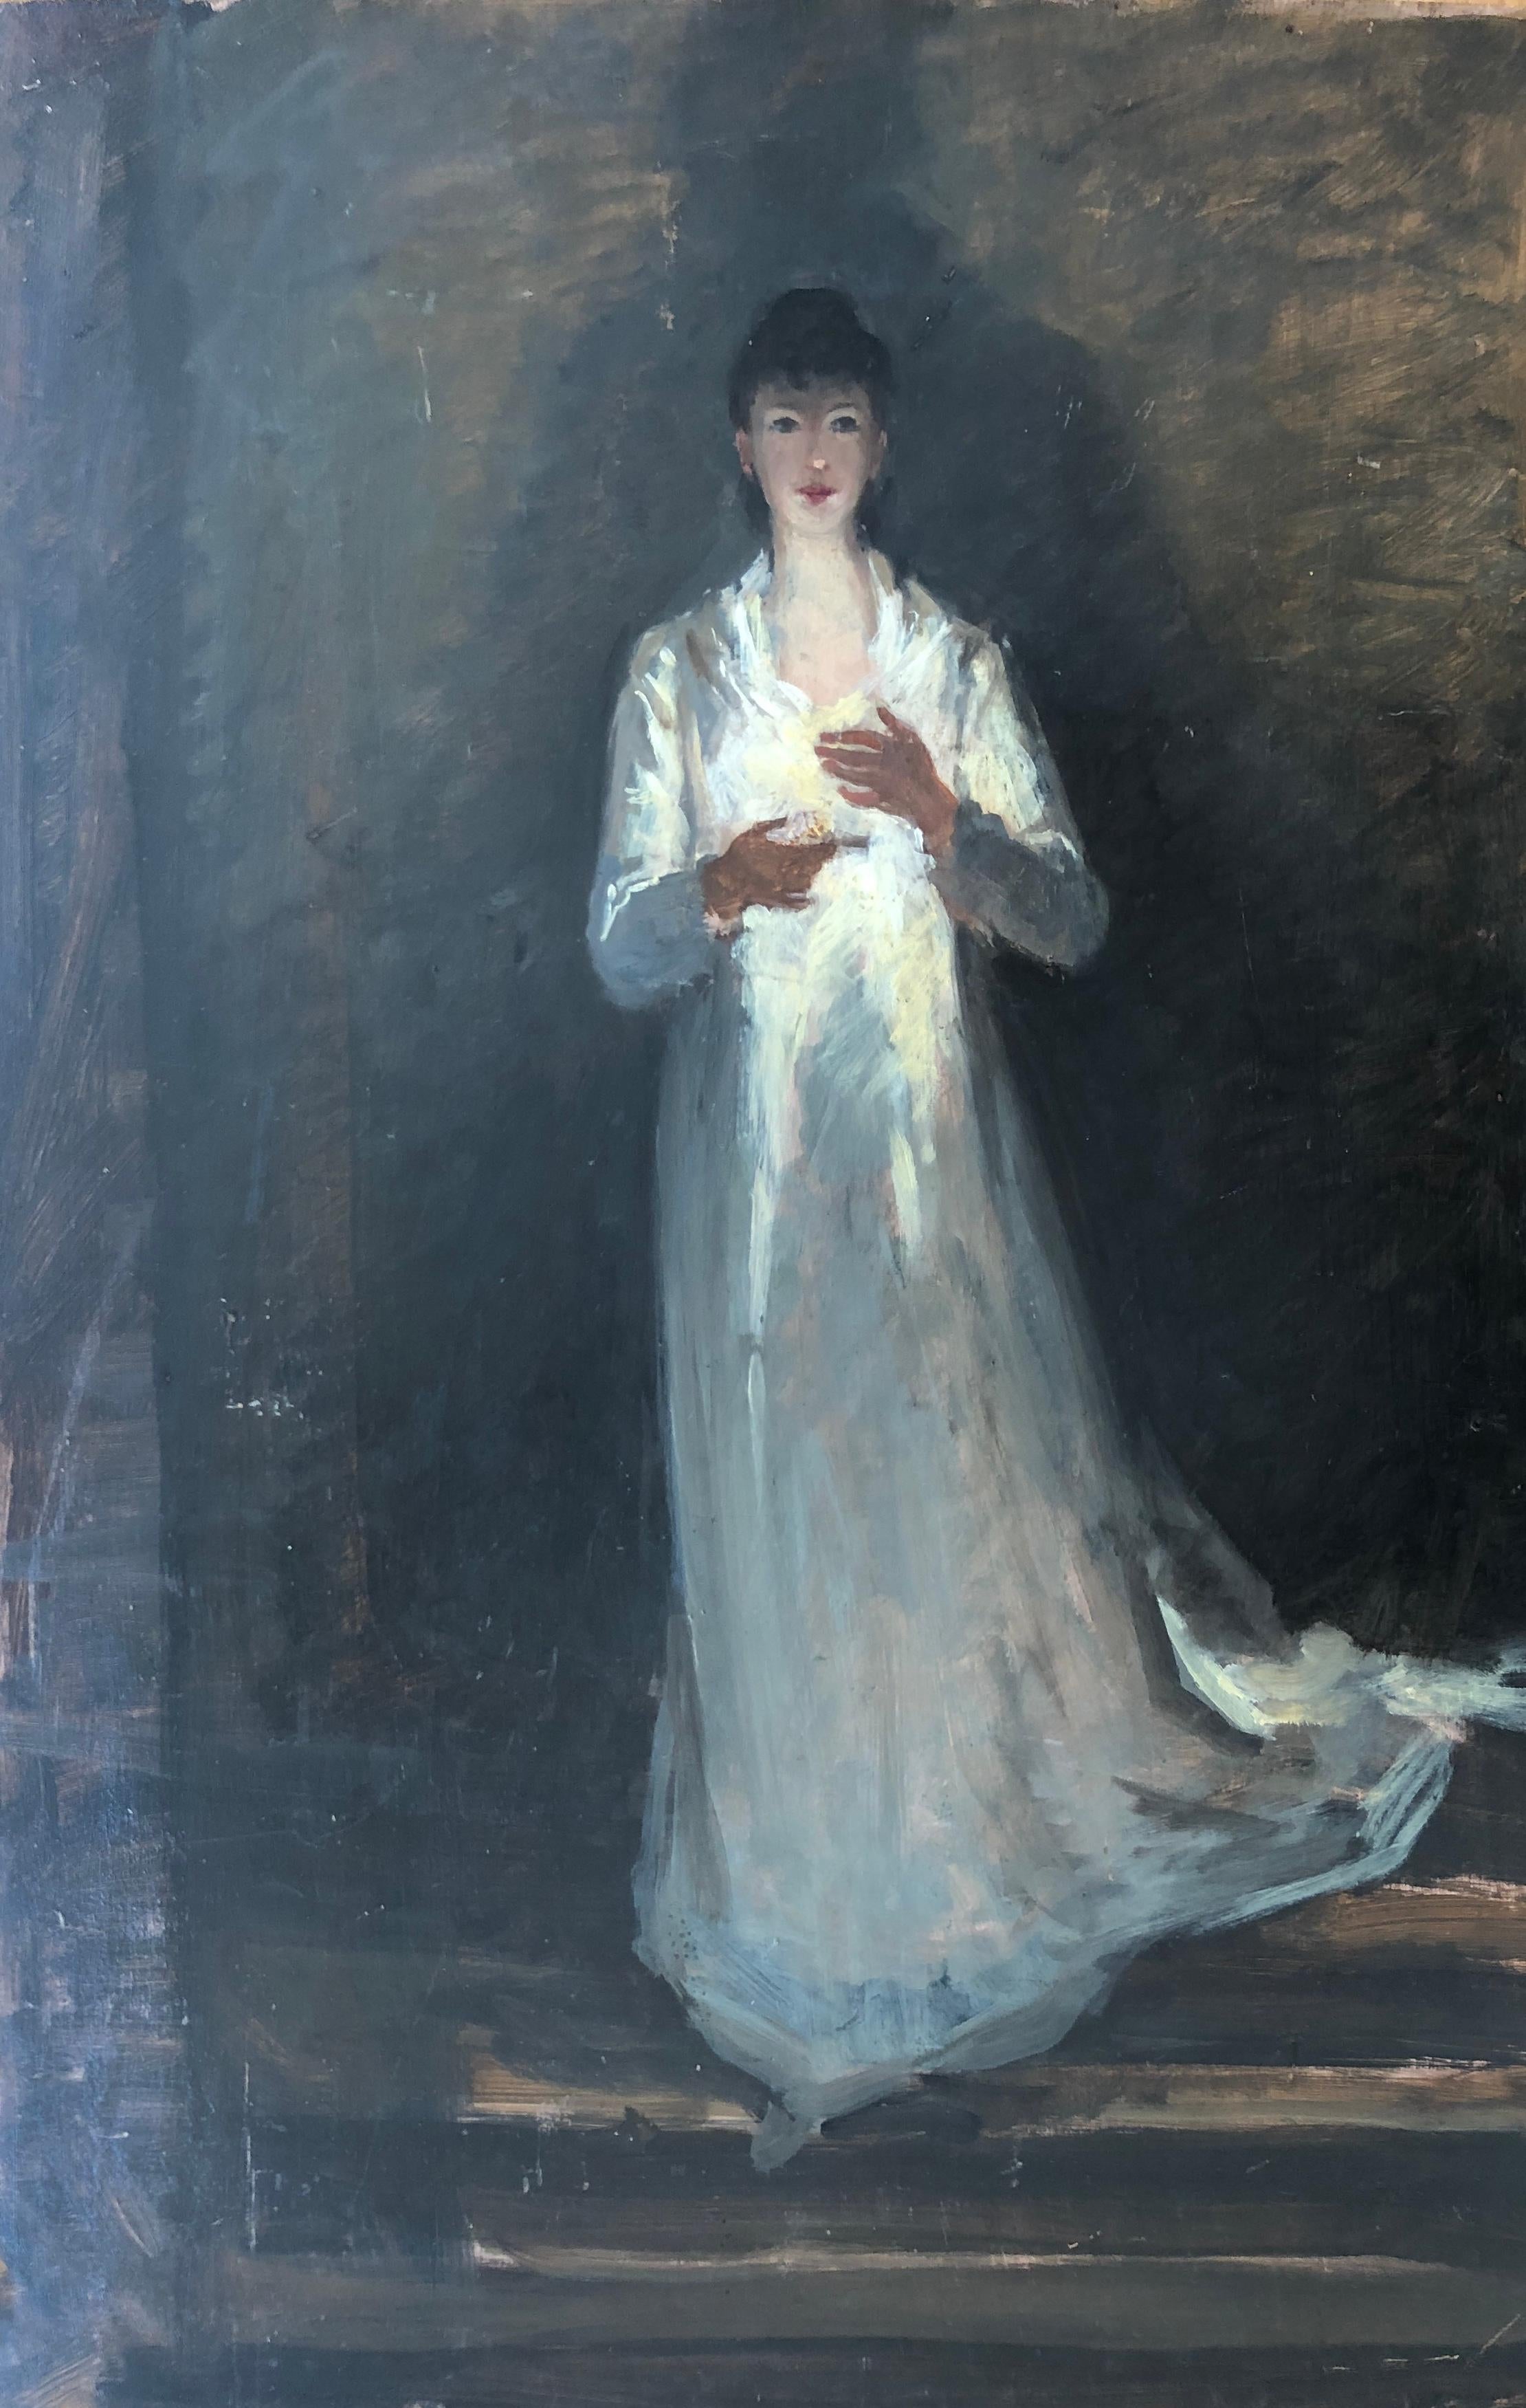 Unknown Figurative Painting - Study of a young woman at night lighting herself with a candle